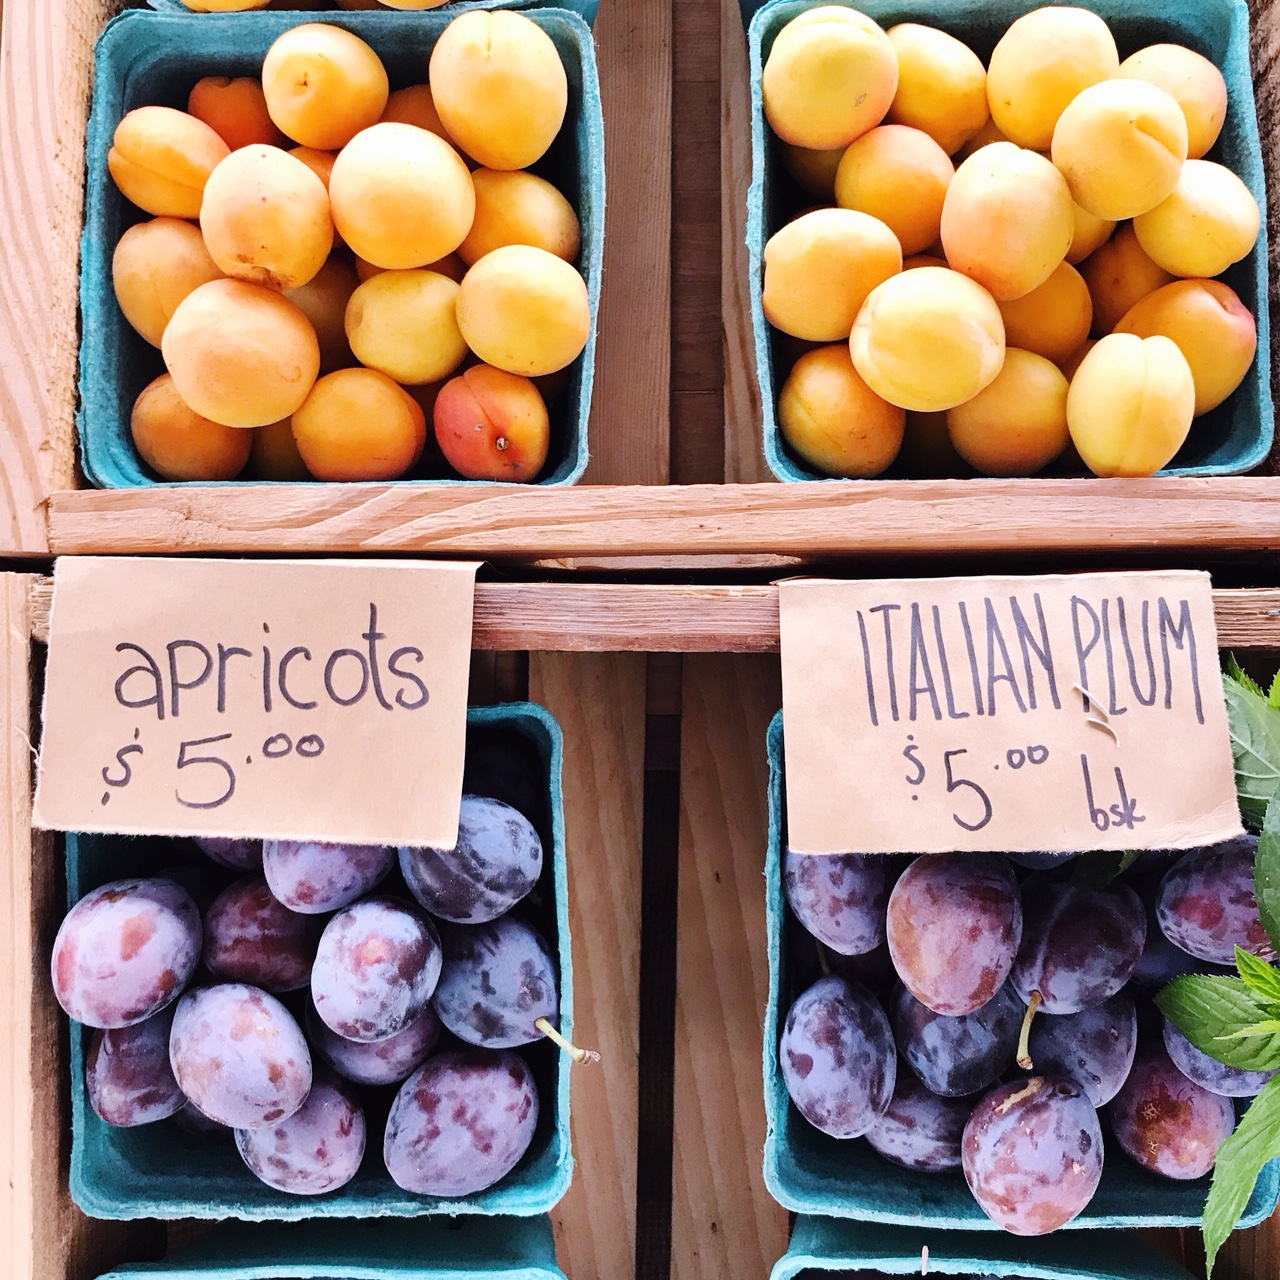 A-Z guide to freezing fruits and vegetables